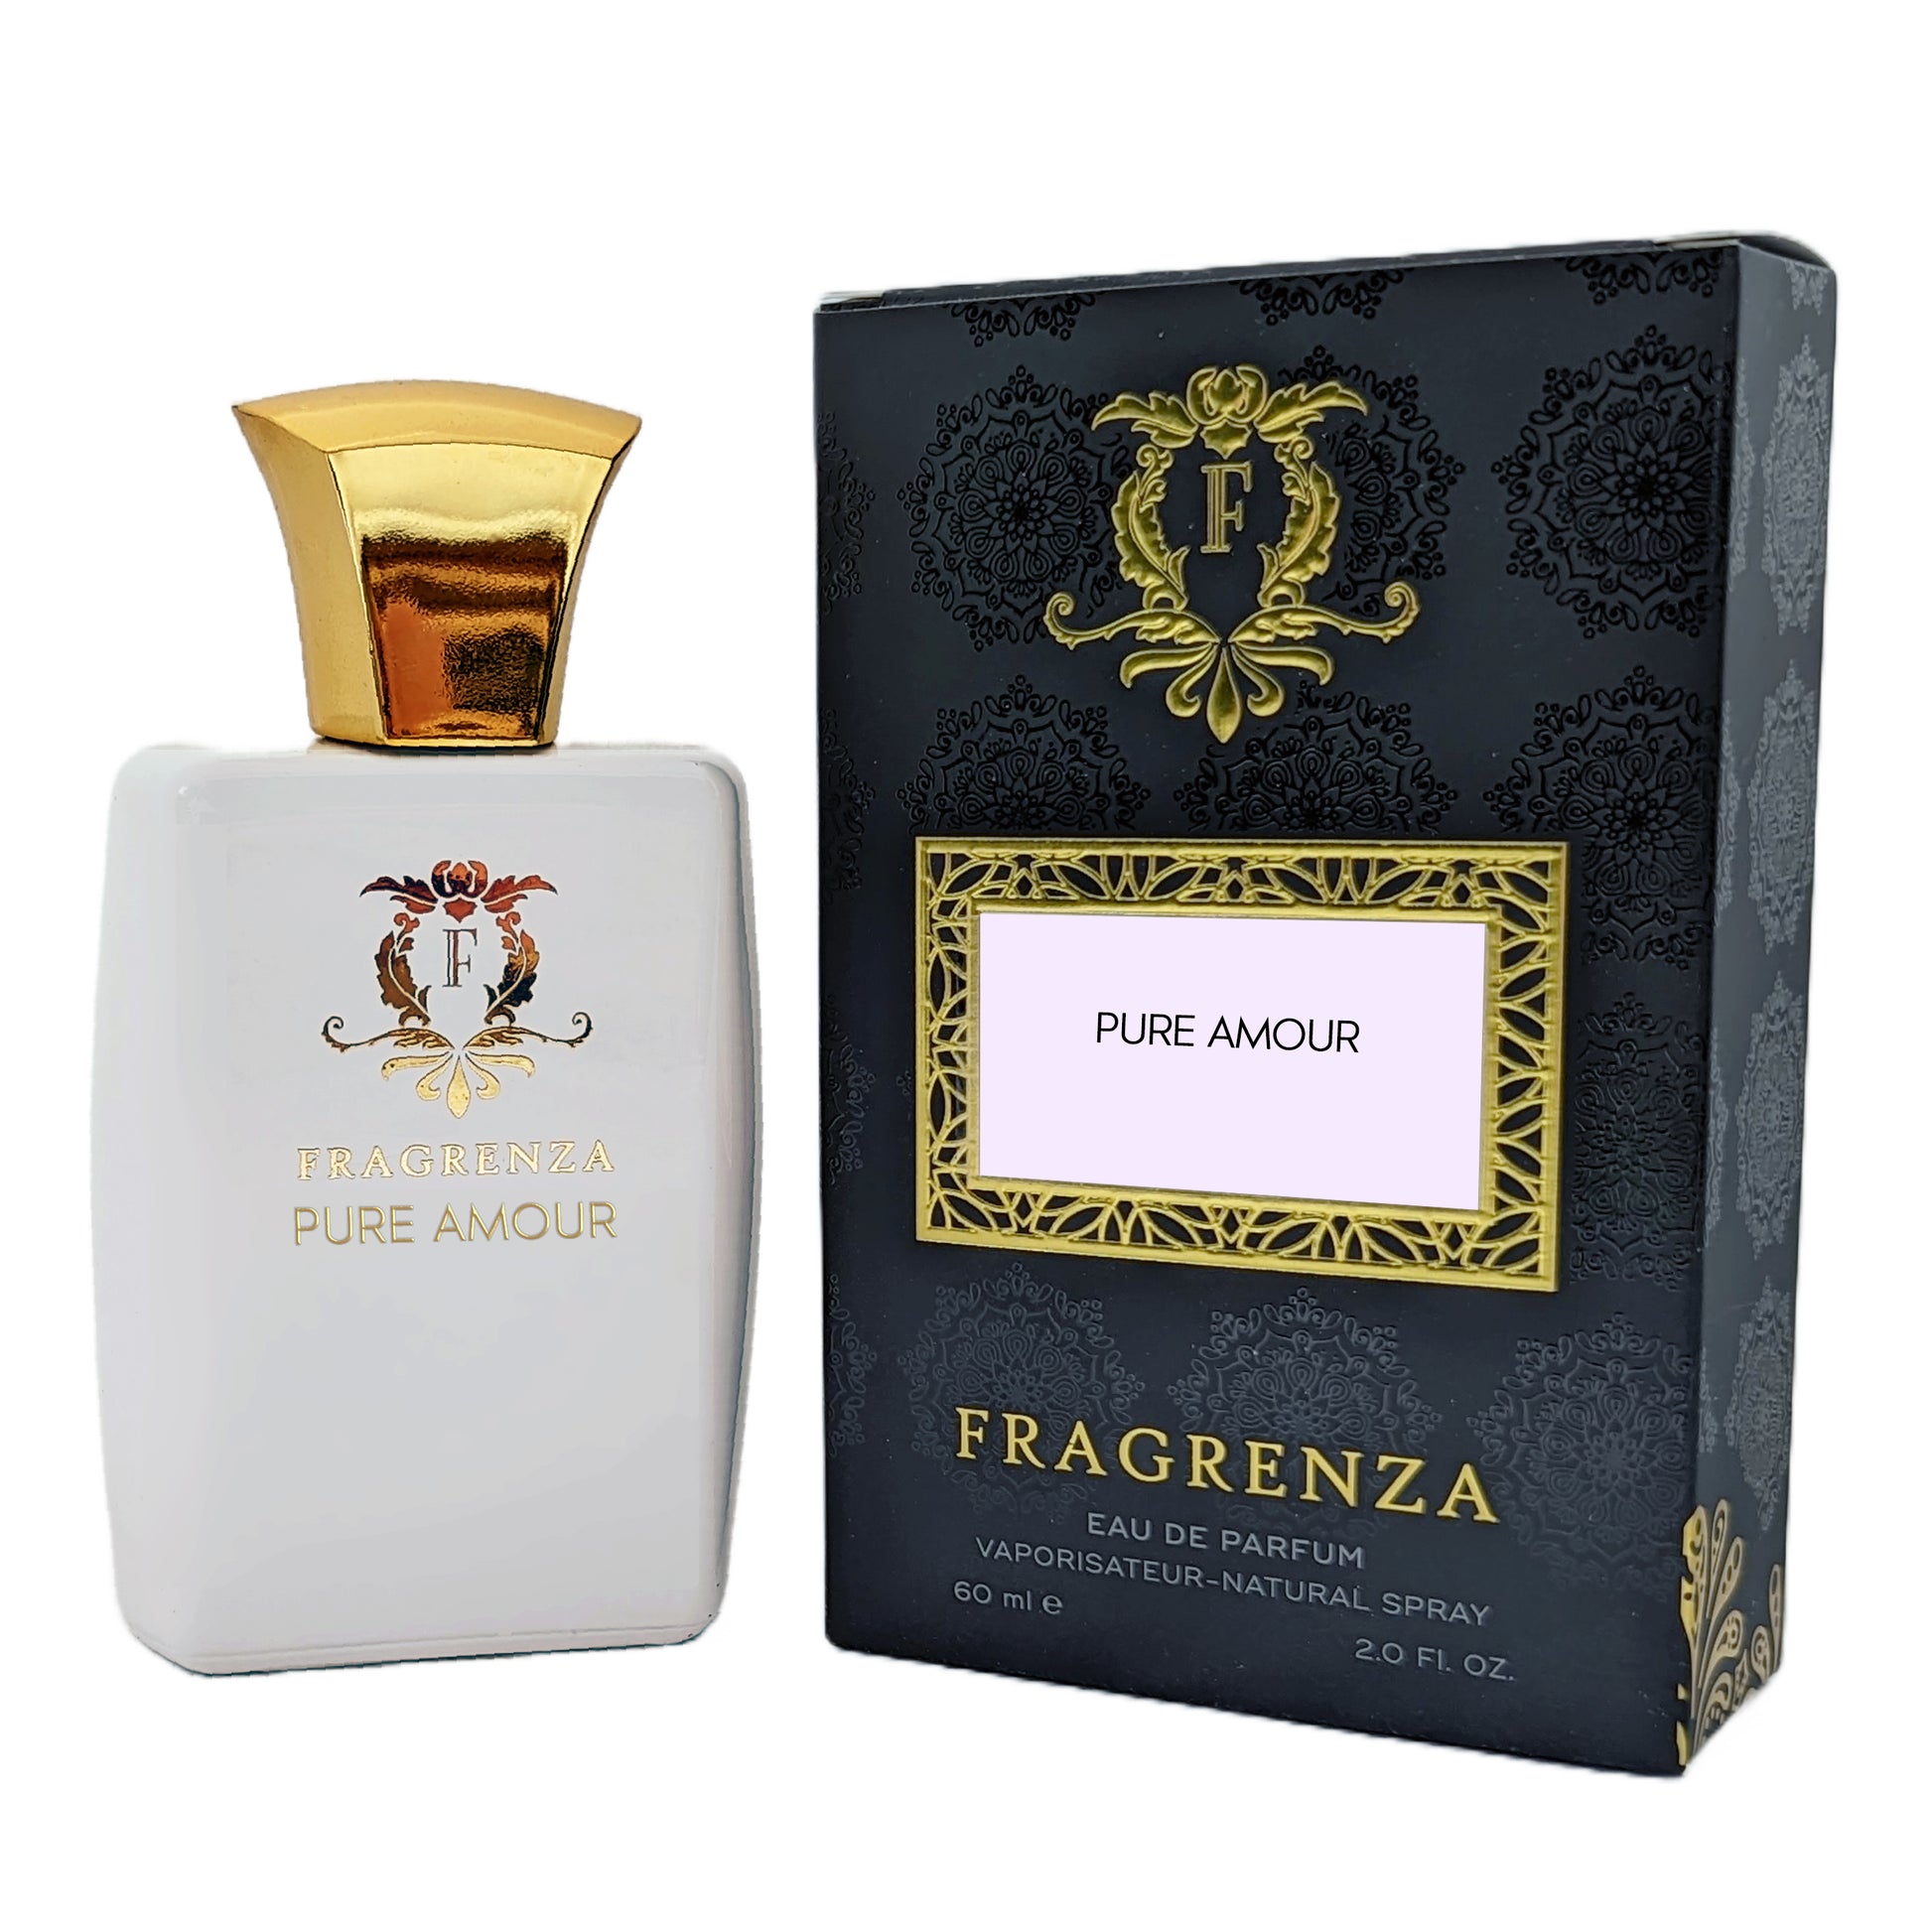 Dior Pure Poison Inspired Luxe Perfume - Pure Amour – Fragrenza